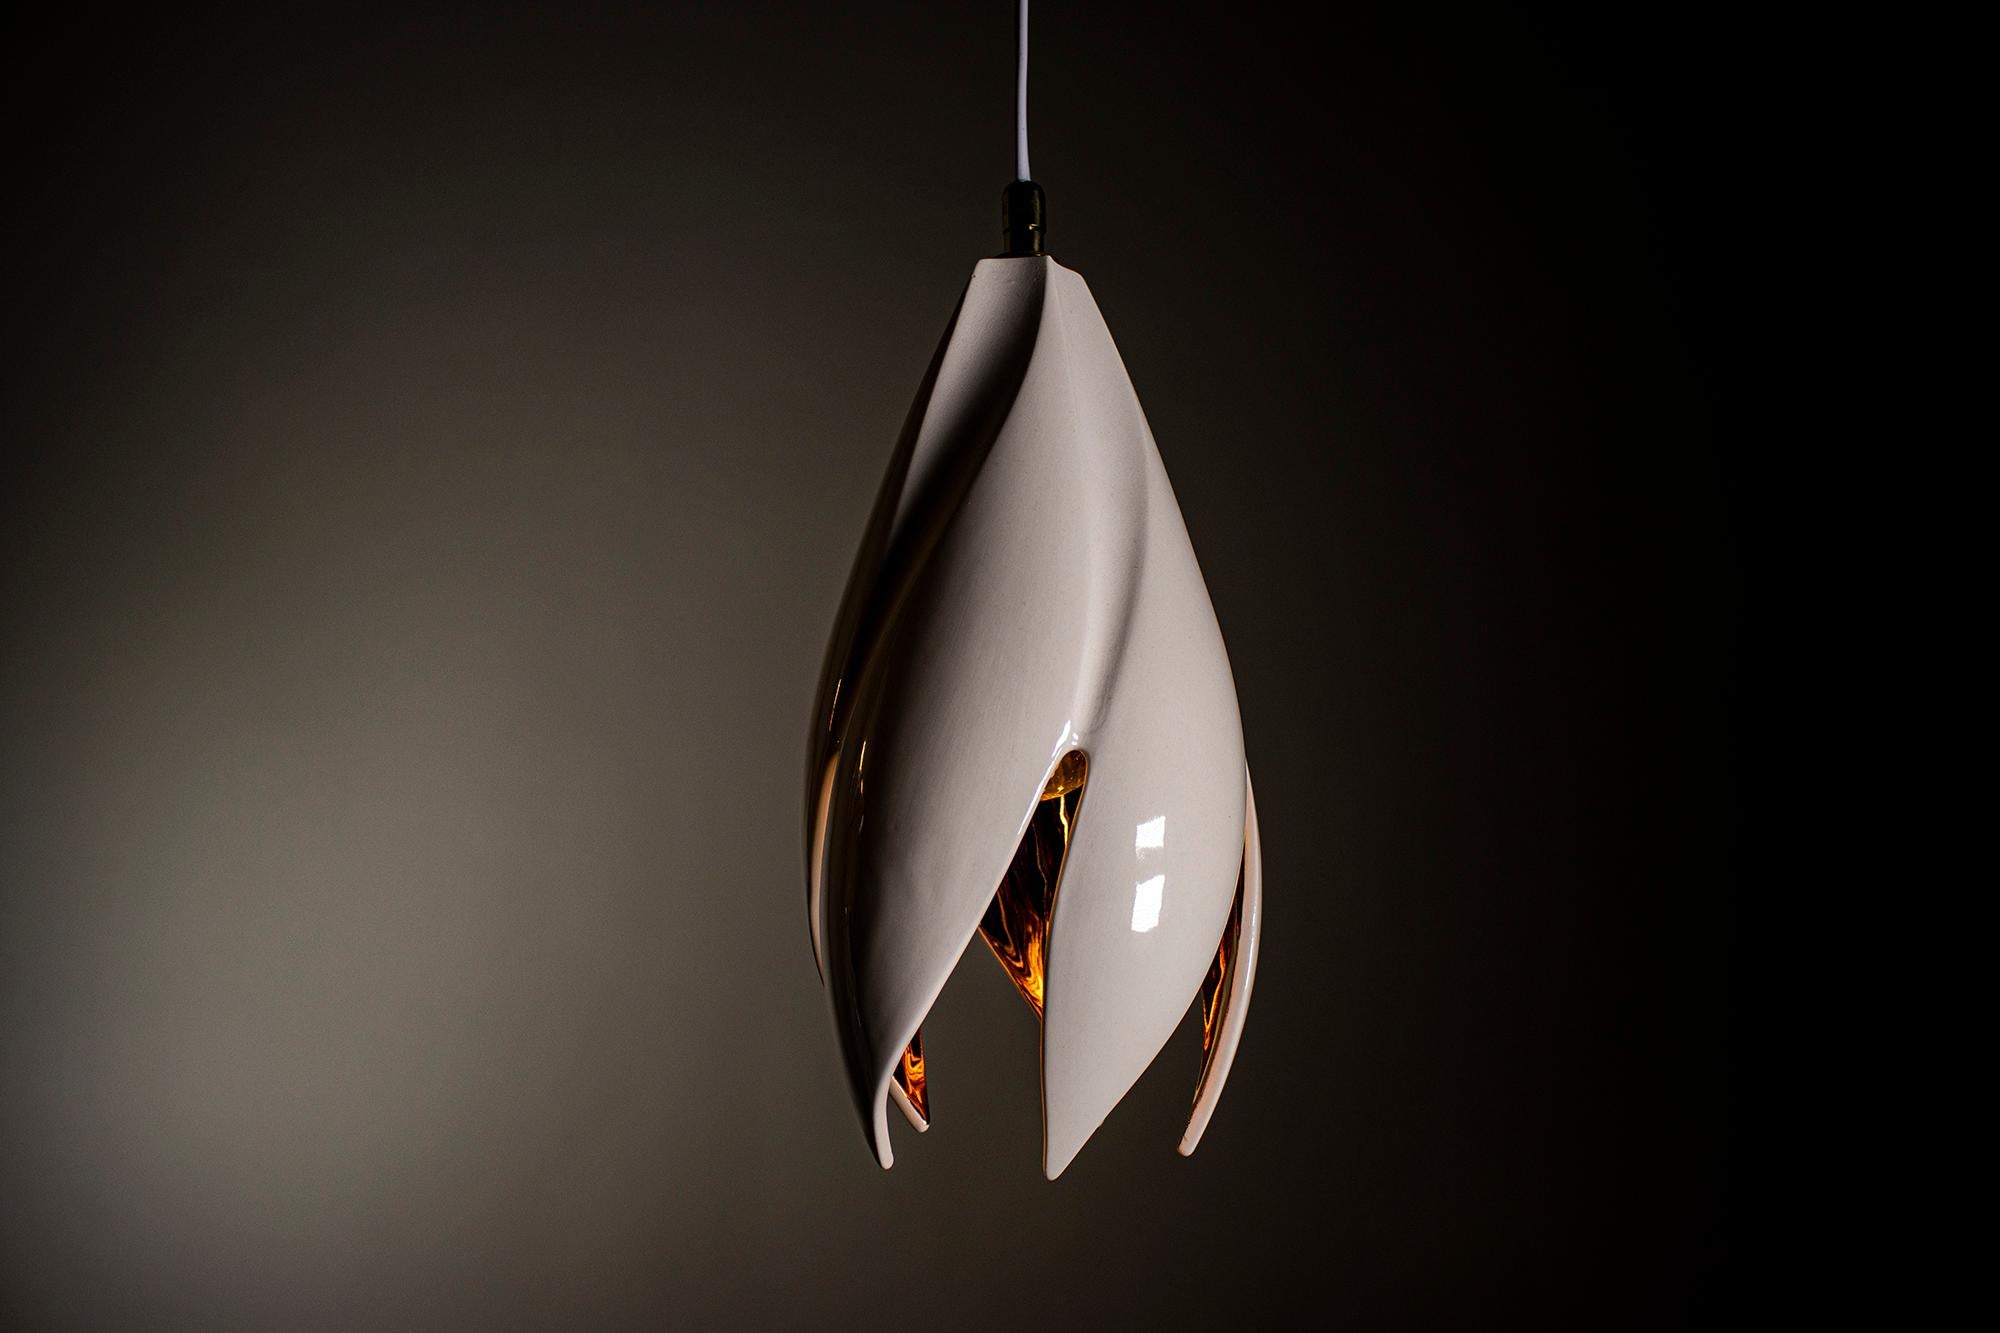 The Twist pendants are designed to be an elegant lighting solution for any space. These pendants are designed to be hung alone, in pairs, trios, or clusters, making them a versatile addition to any room. Their simple yet striking twisted design